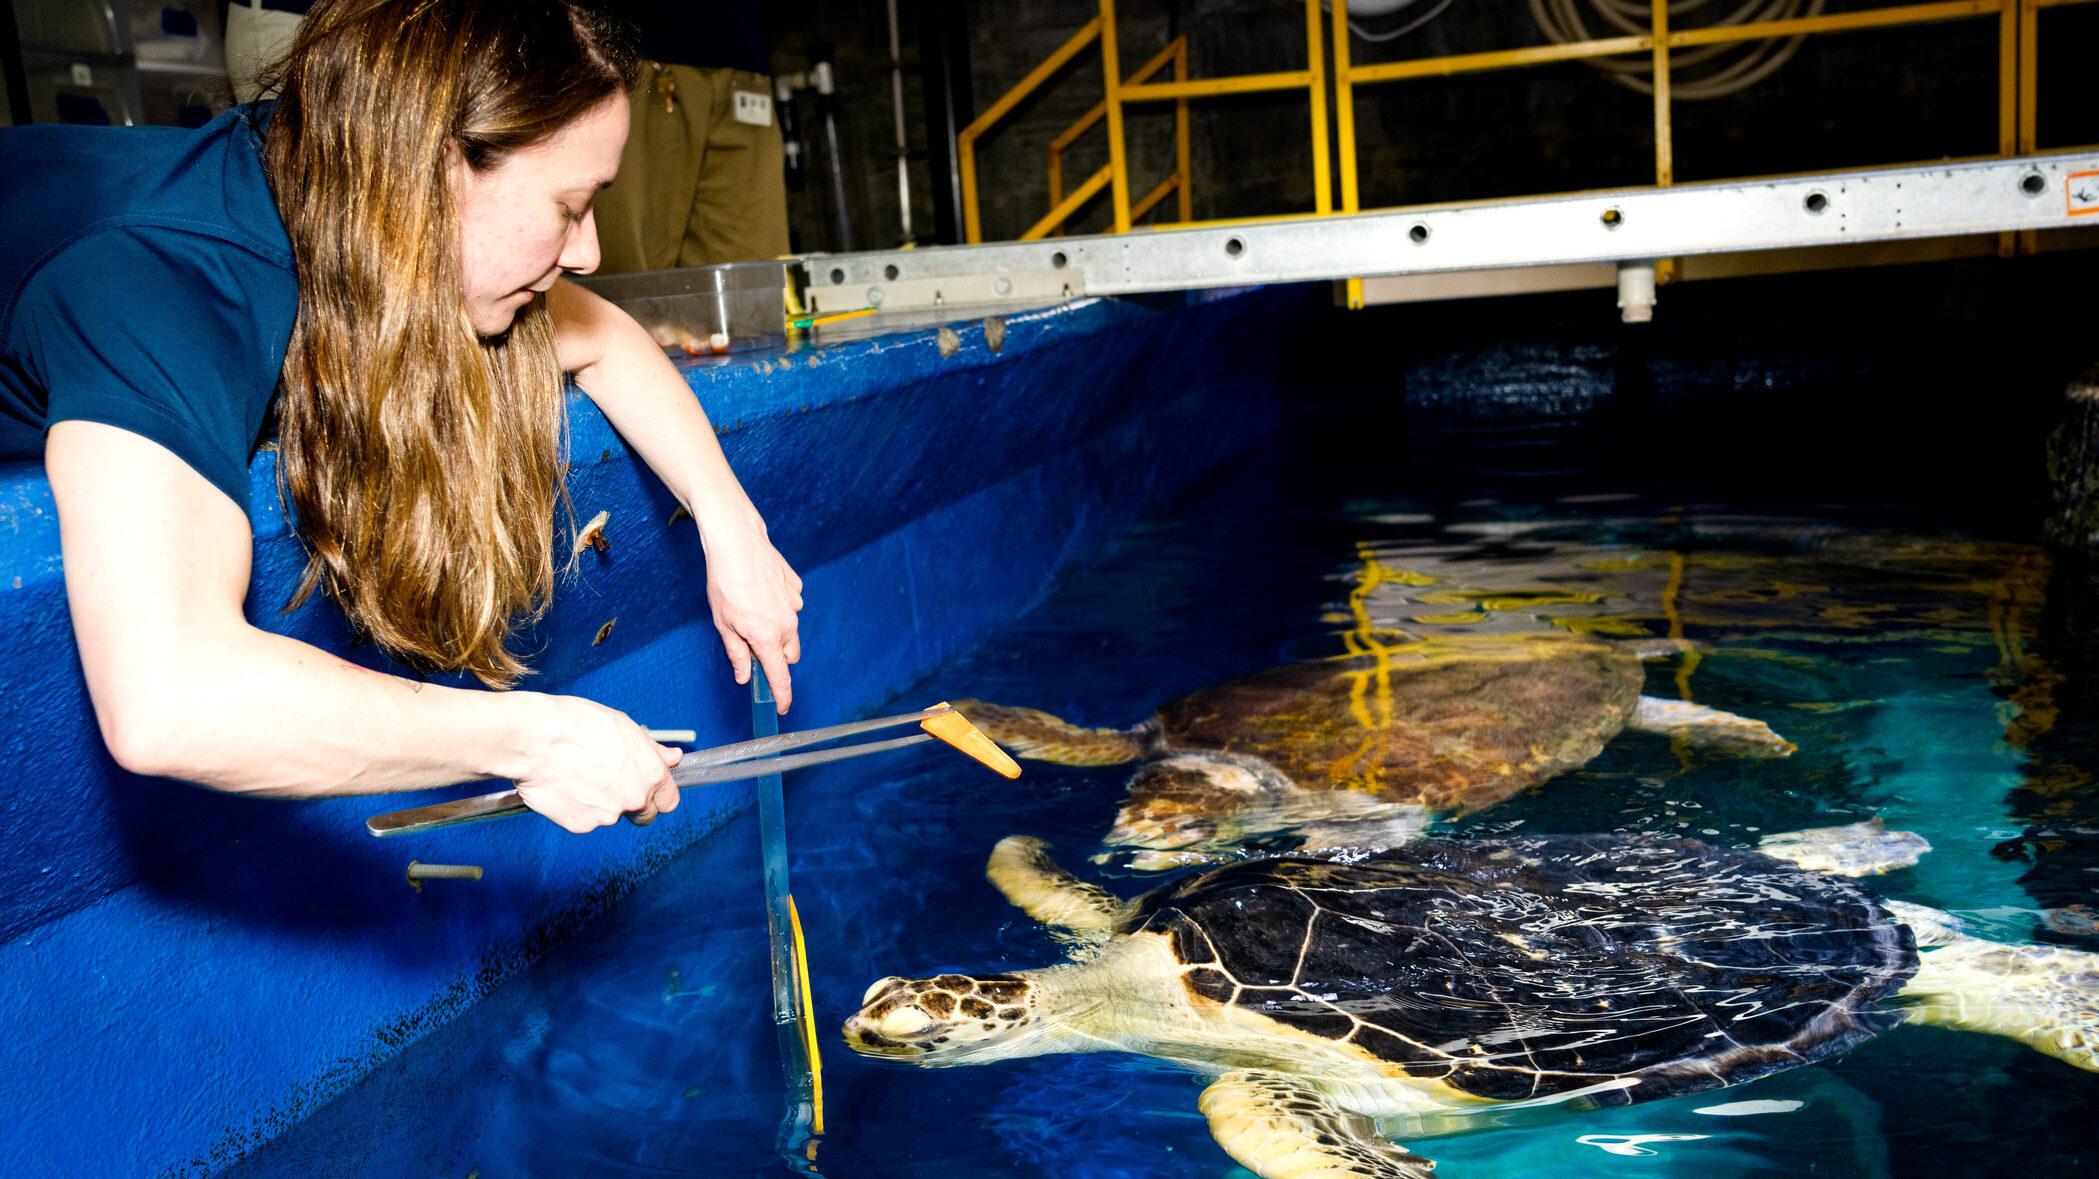 Staff member feeds carrot to sea turtle in exhibit from behind the scenes using tongs.